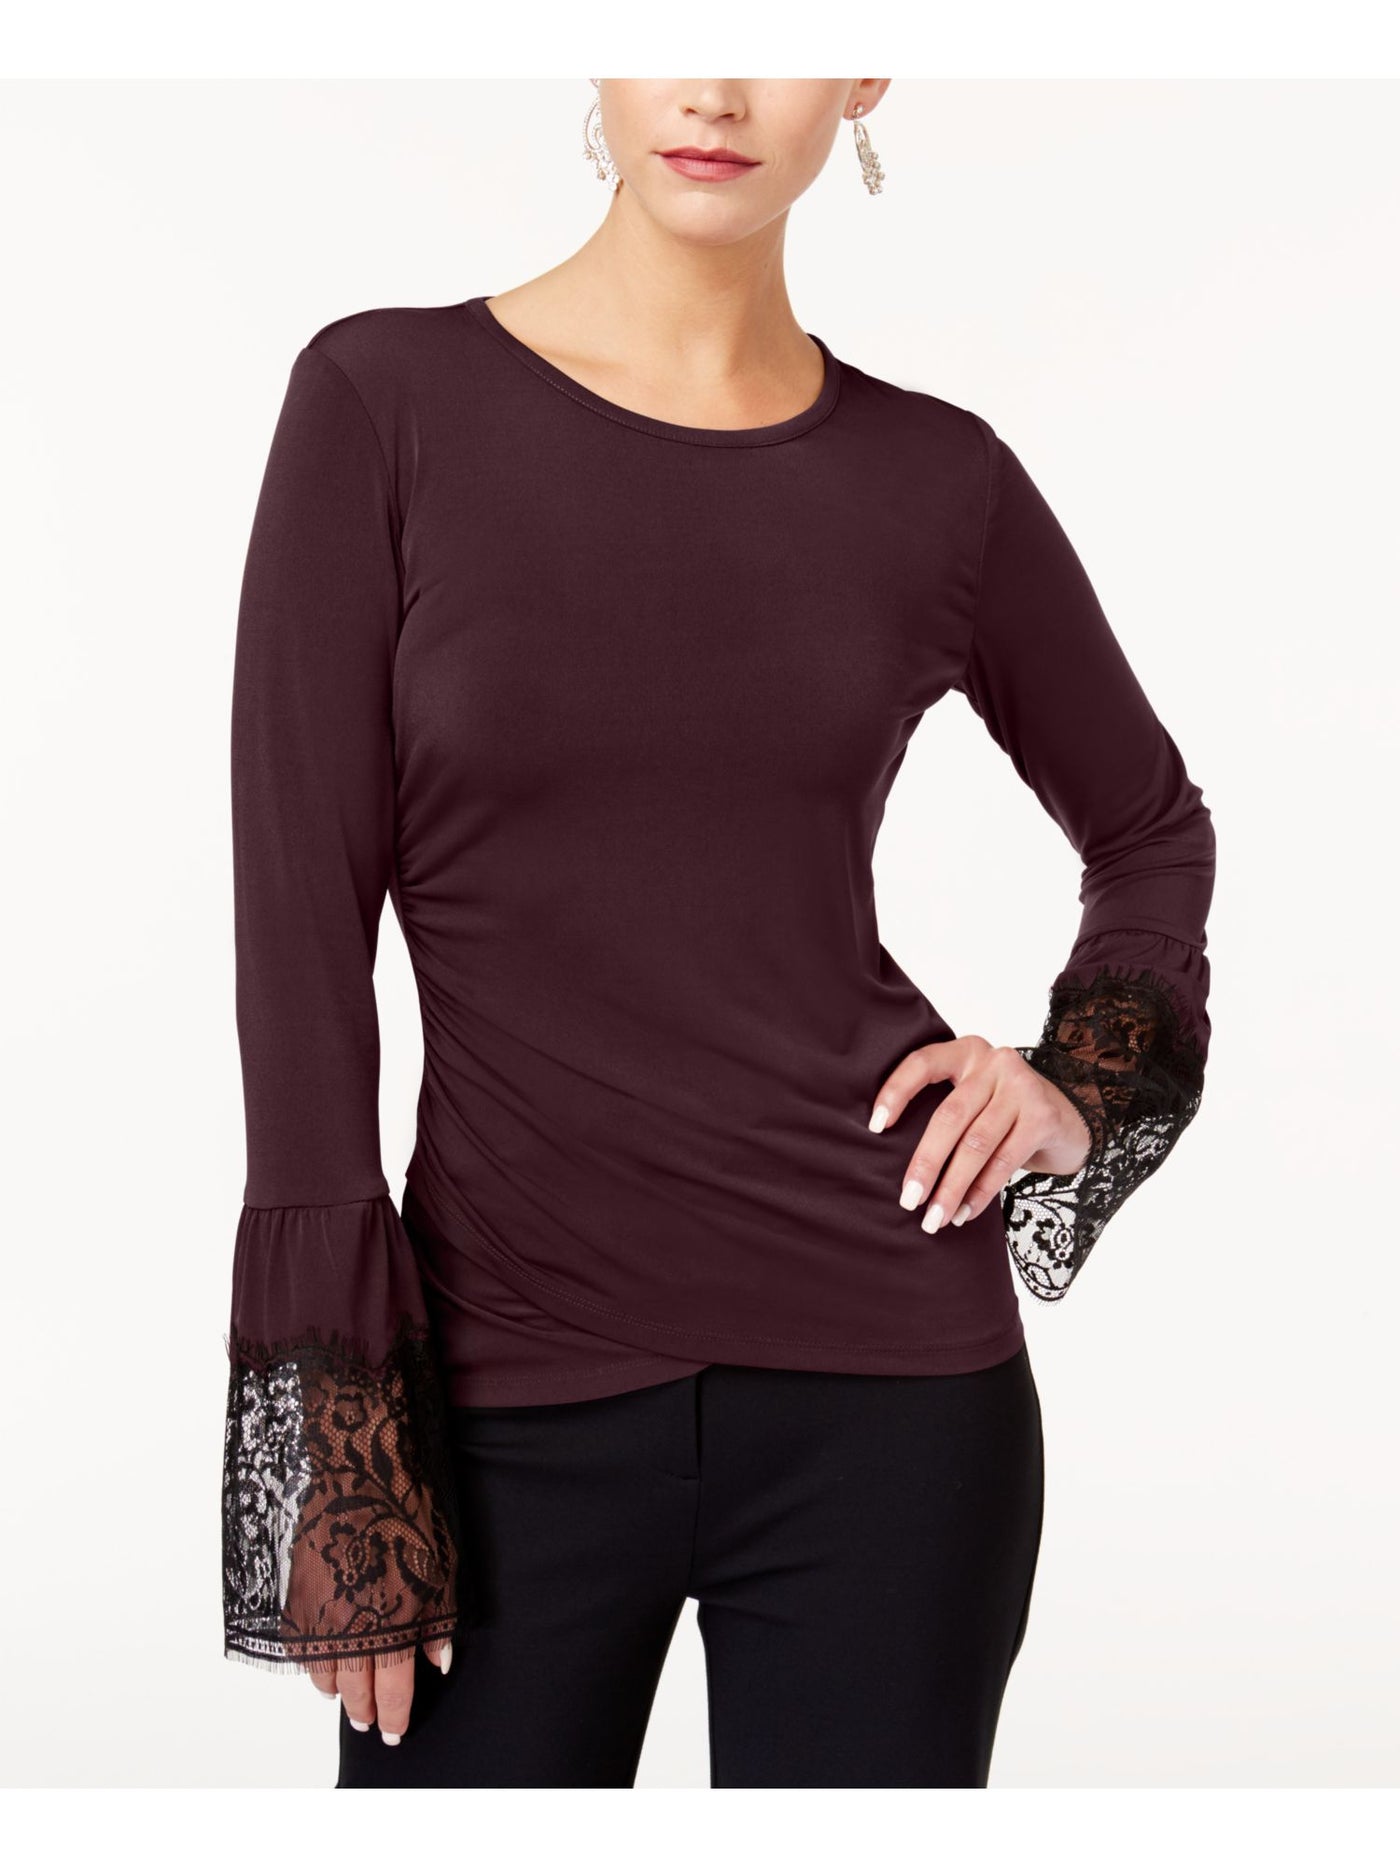 KOBI Womens Burgundy Ruched Lace Cuffs Long Sleeve Jewel Neck Top XS